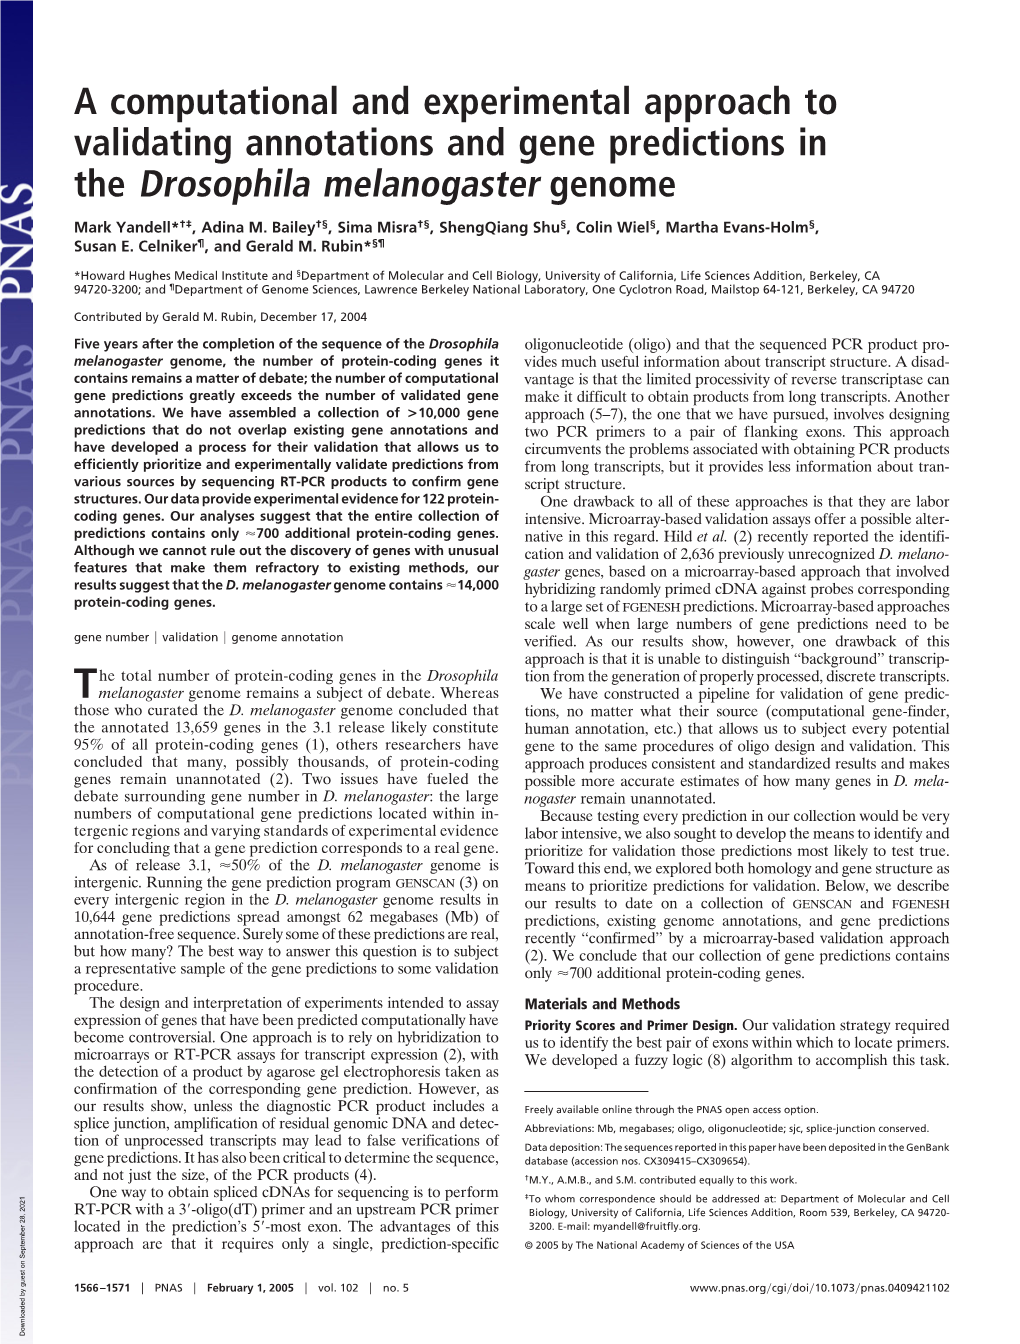 A Computational and Experimental Approach to Validating Annotations and Gene Predictions in the Drosophila Melanogaster Genome